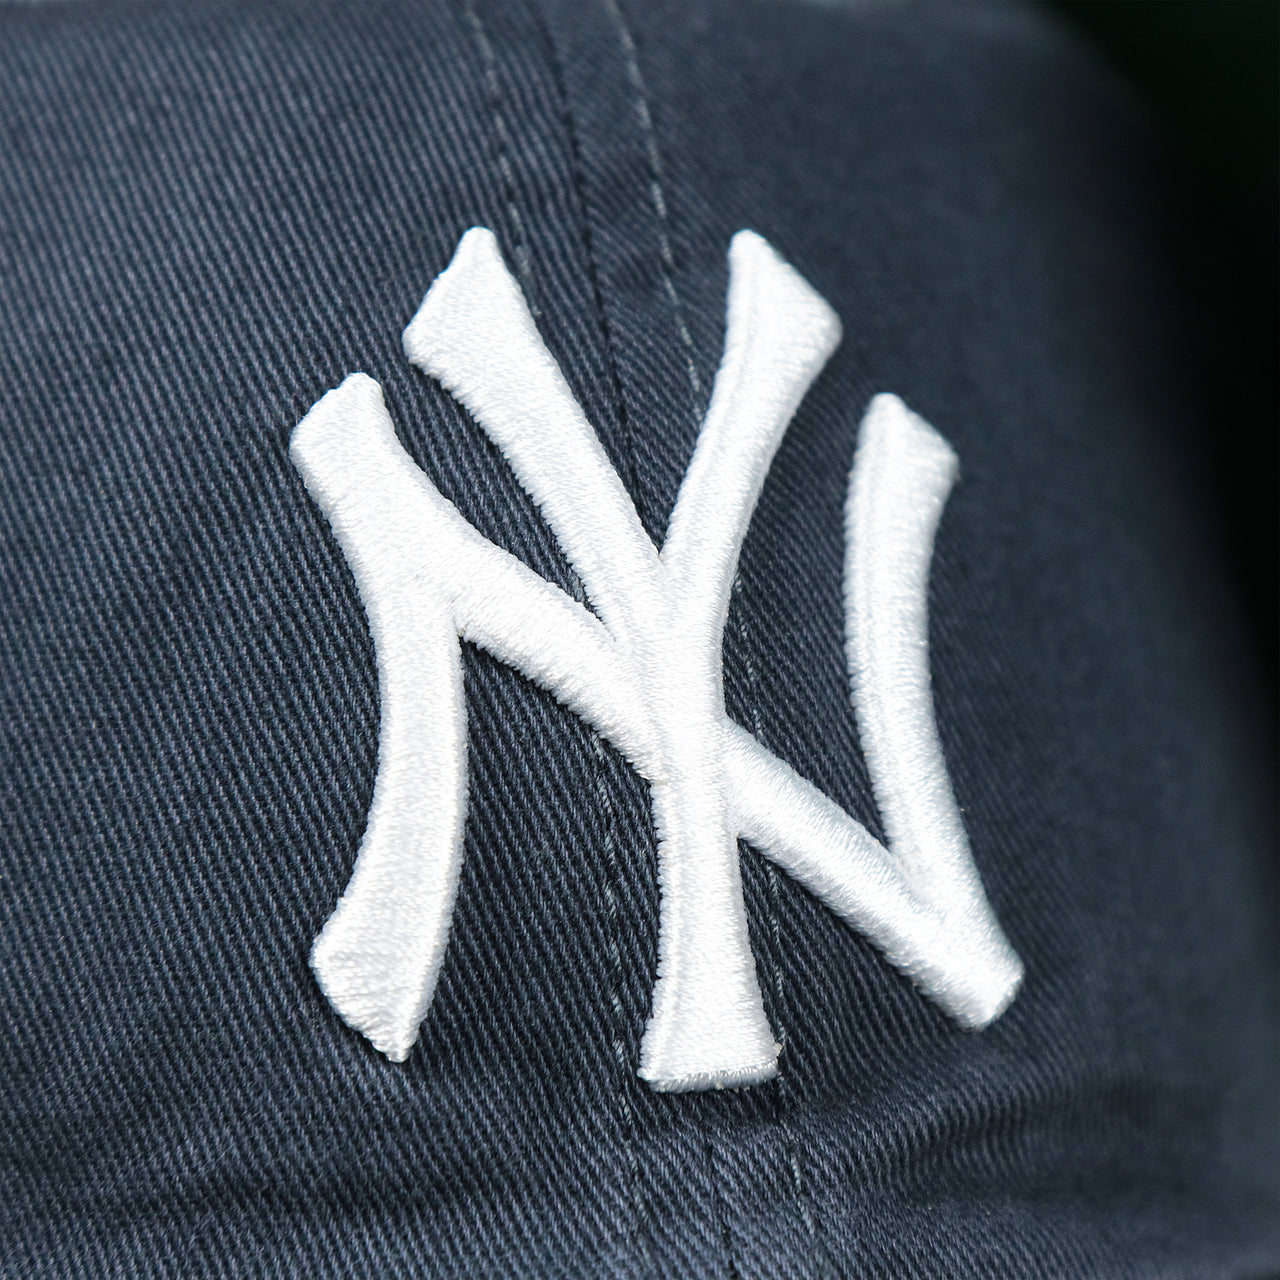 The Yankees Logo on the Cooperstown New York Yankees Green Bottom Yankees Wordmark Fitted Cap | Vintage Navy Fitted Cap